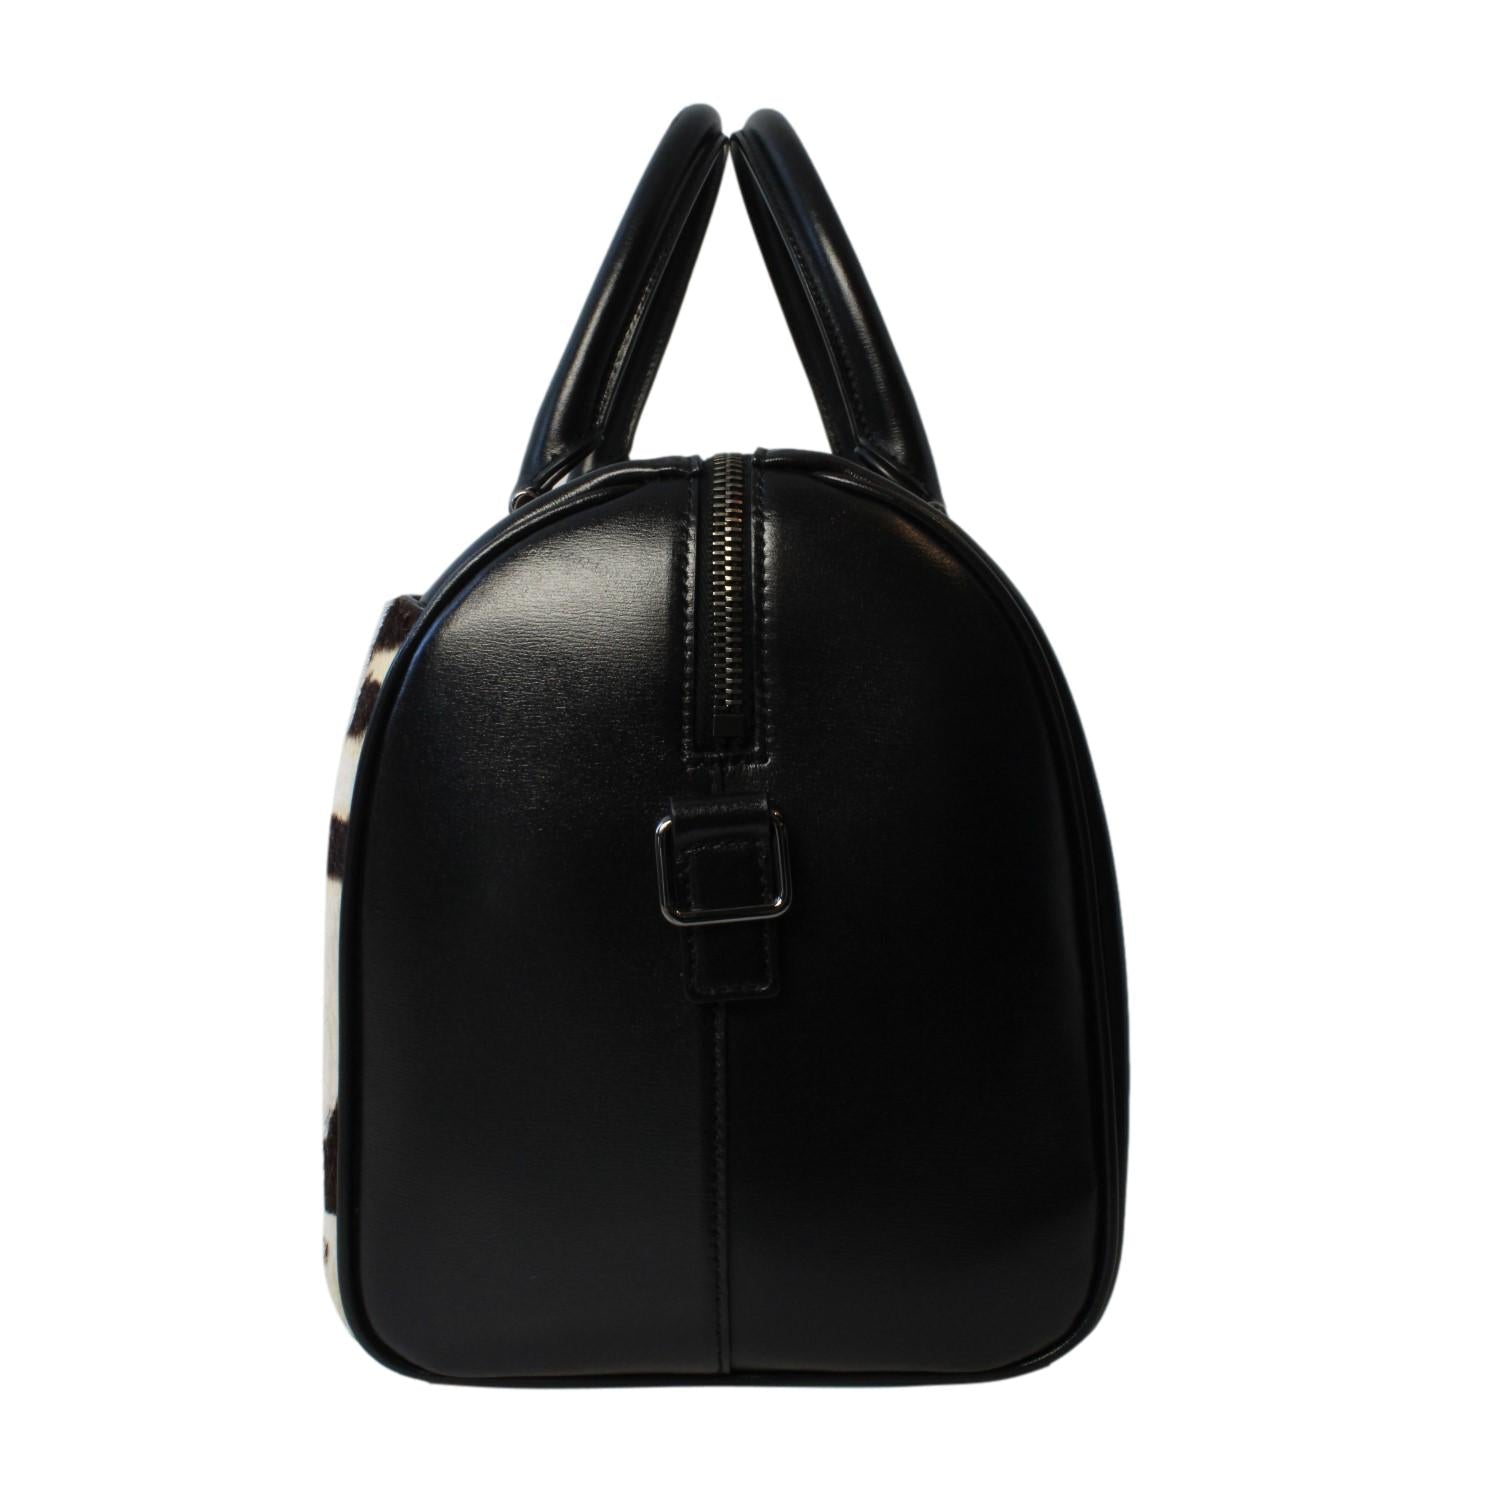 Saint Laurent 12 Hour Calfskin Leather Pony Hair Duffle Bag 533480 at_Queen_Bee_of_Beverly_Hills